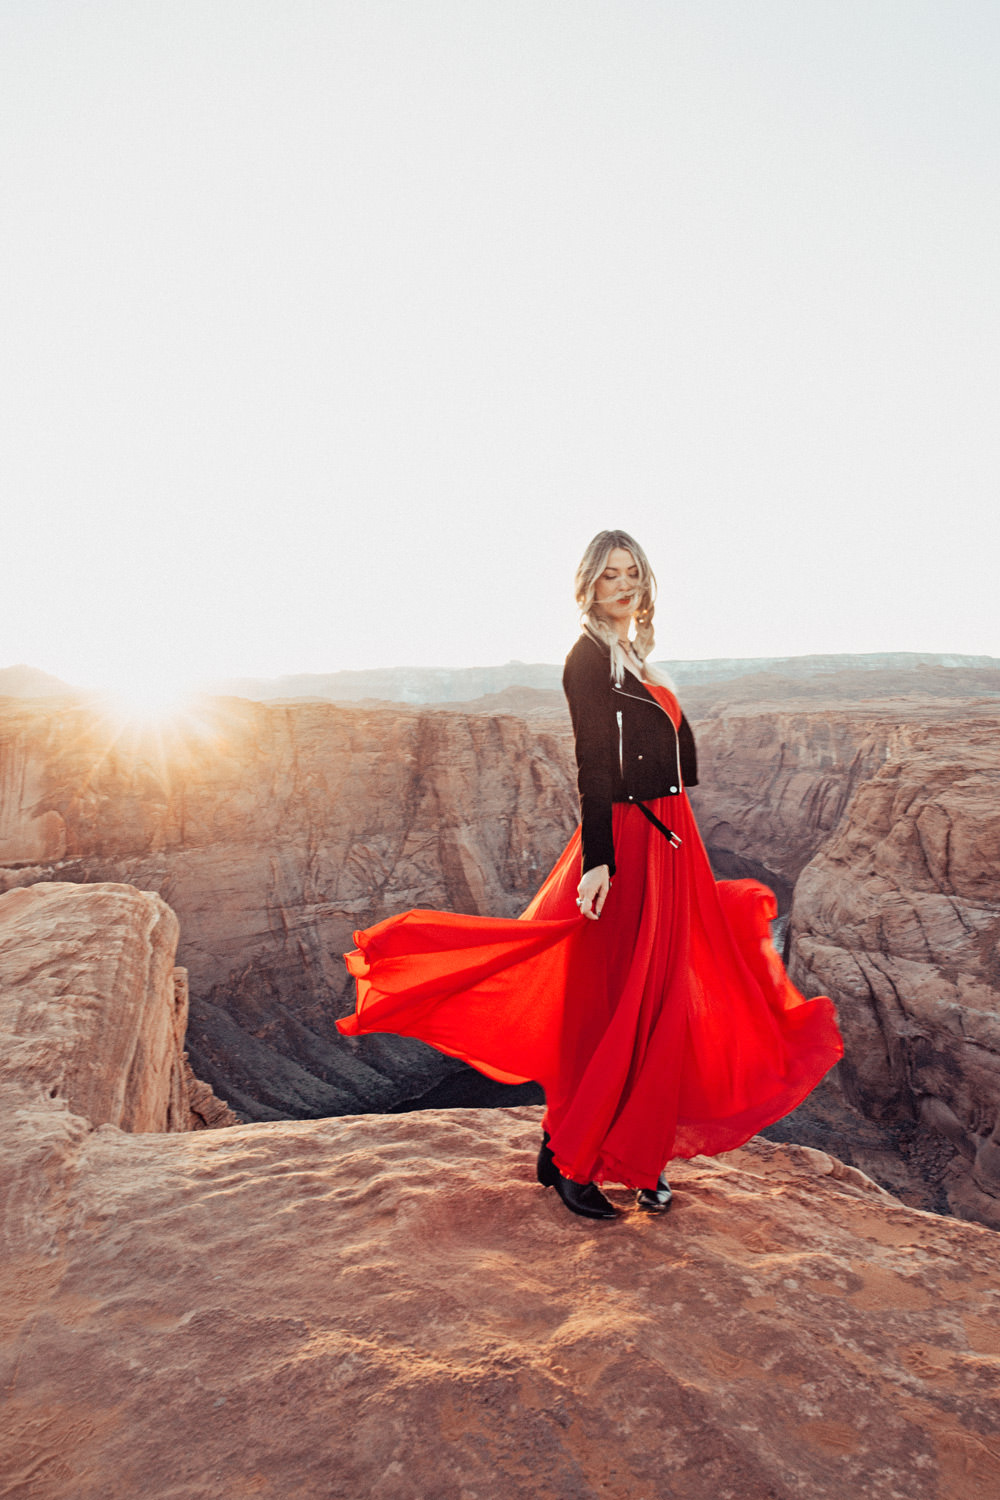 Caitlin Lindquist of the travel blog Dash of Darling shares her getaway to Horseshoe Bend in Arizona